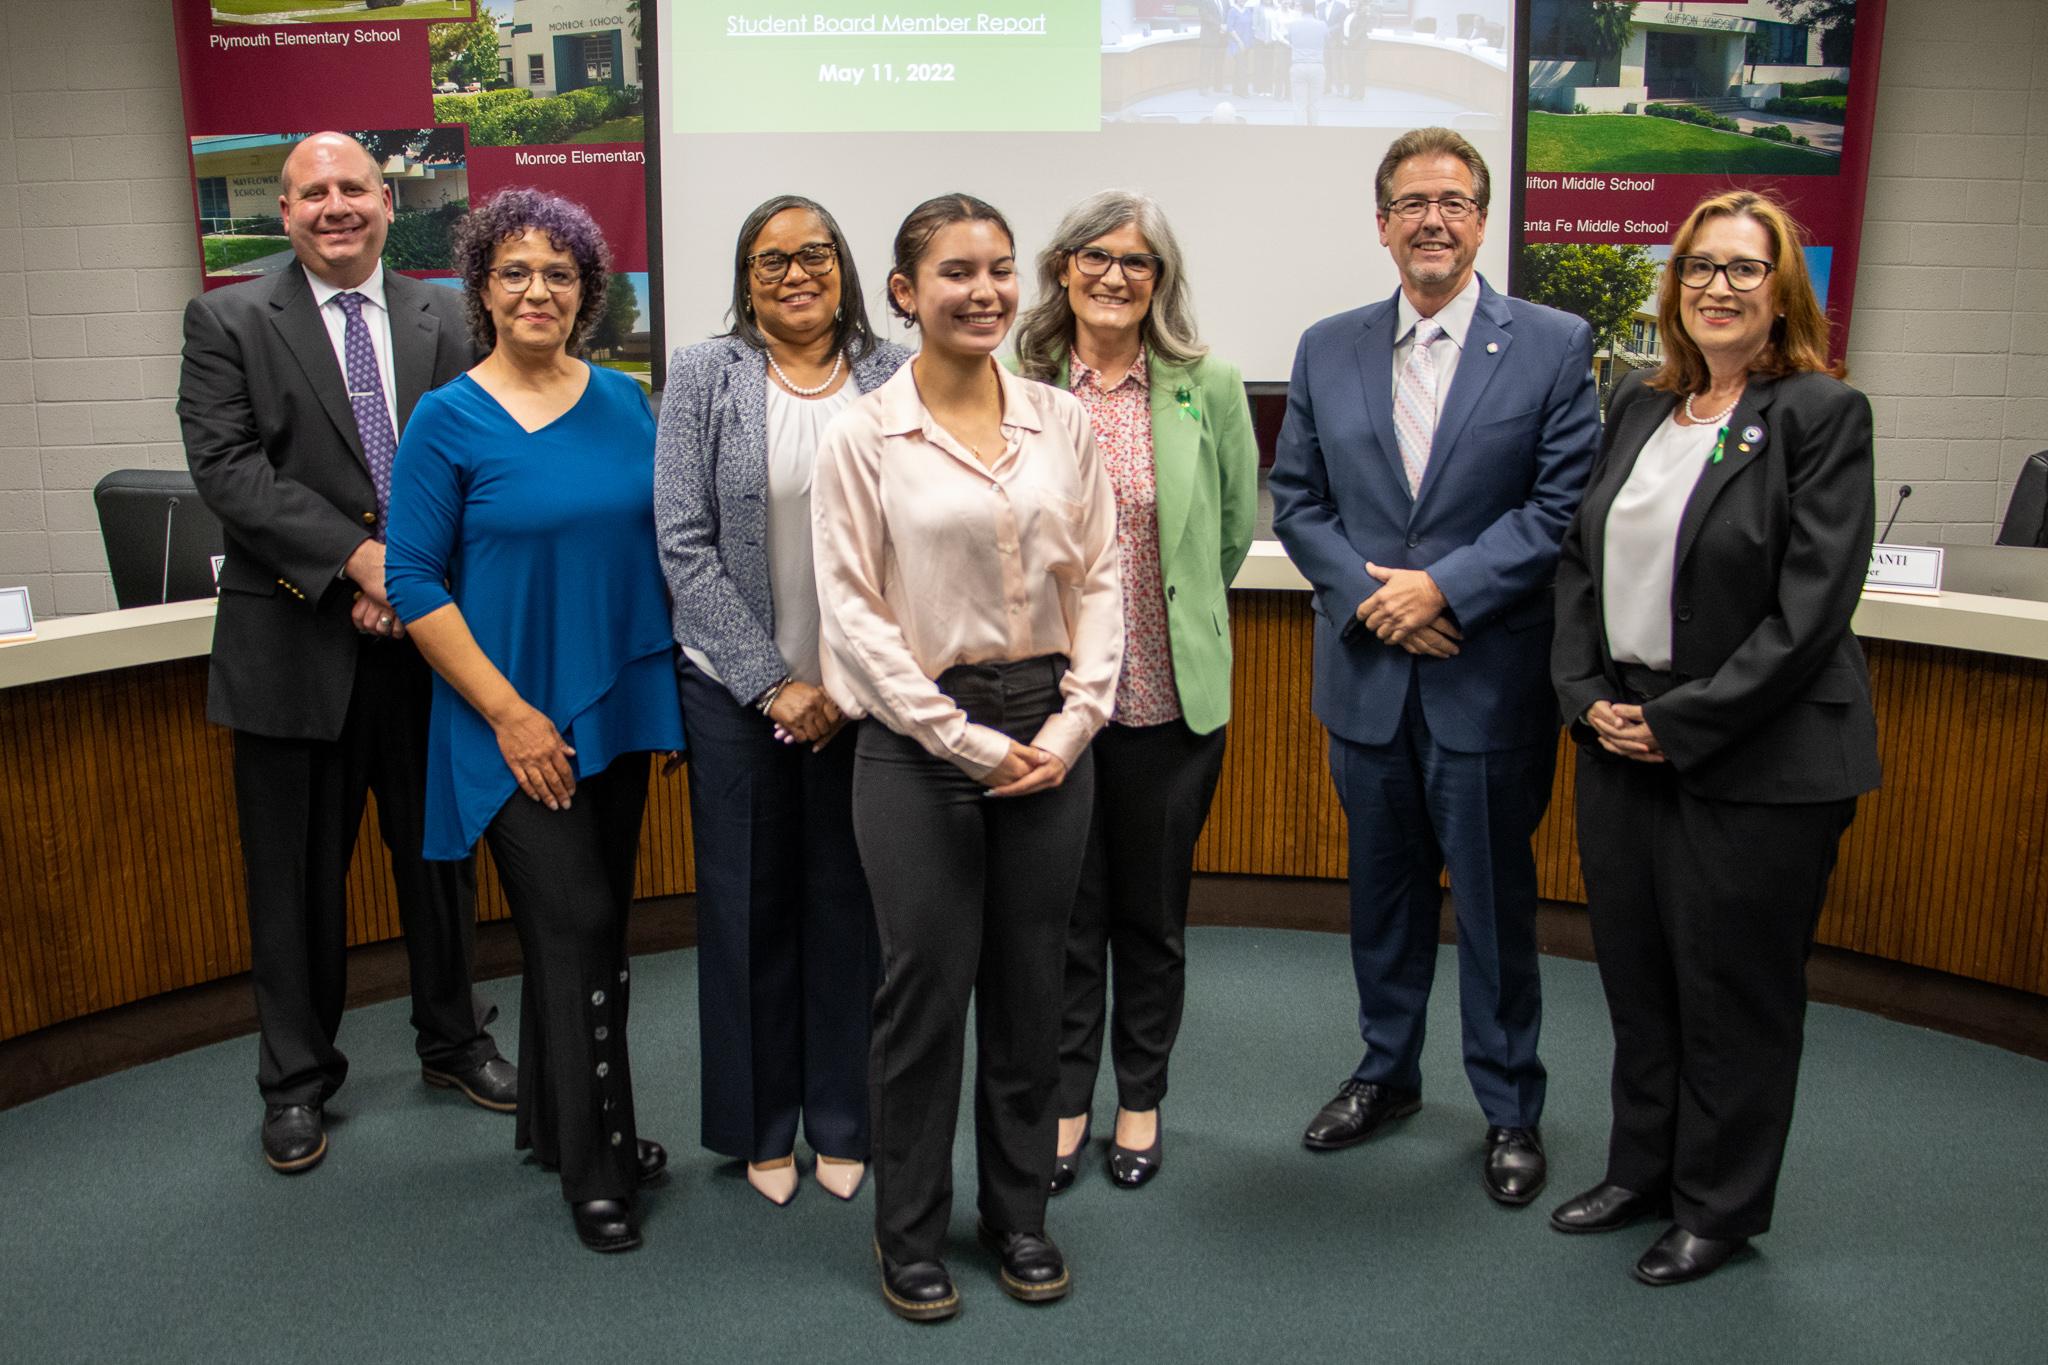 Board Members thanked Alexia Holt of Monrovia High School (first picture) and Brianna Campbell of Canyon Oaks High School/ Mountain Park School (second picture) for their service as Student Board Members for the Board of Education.